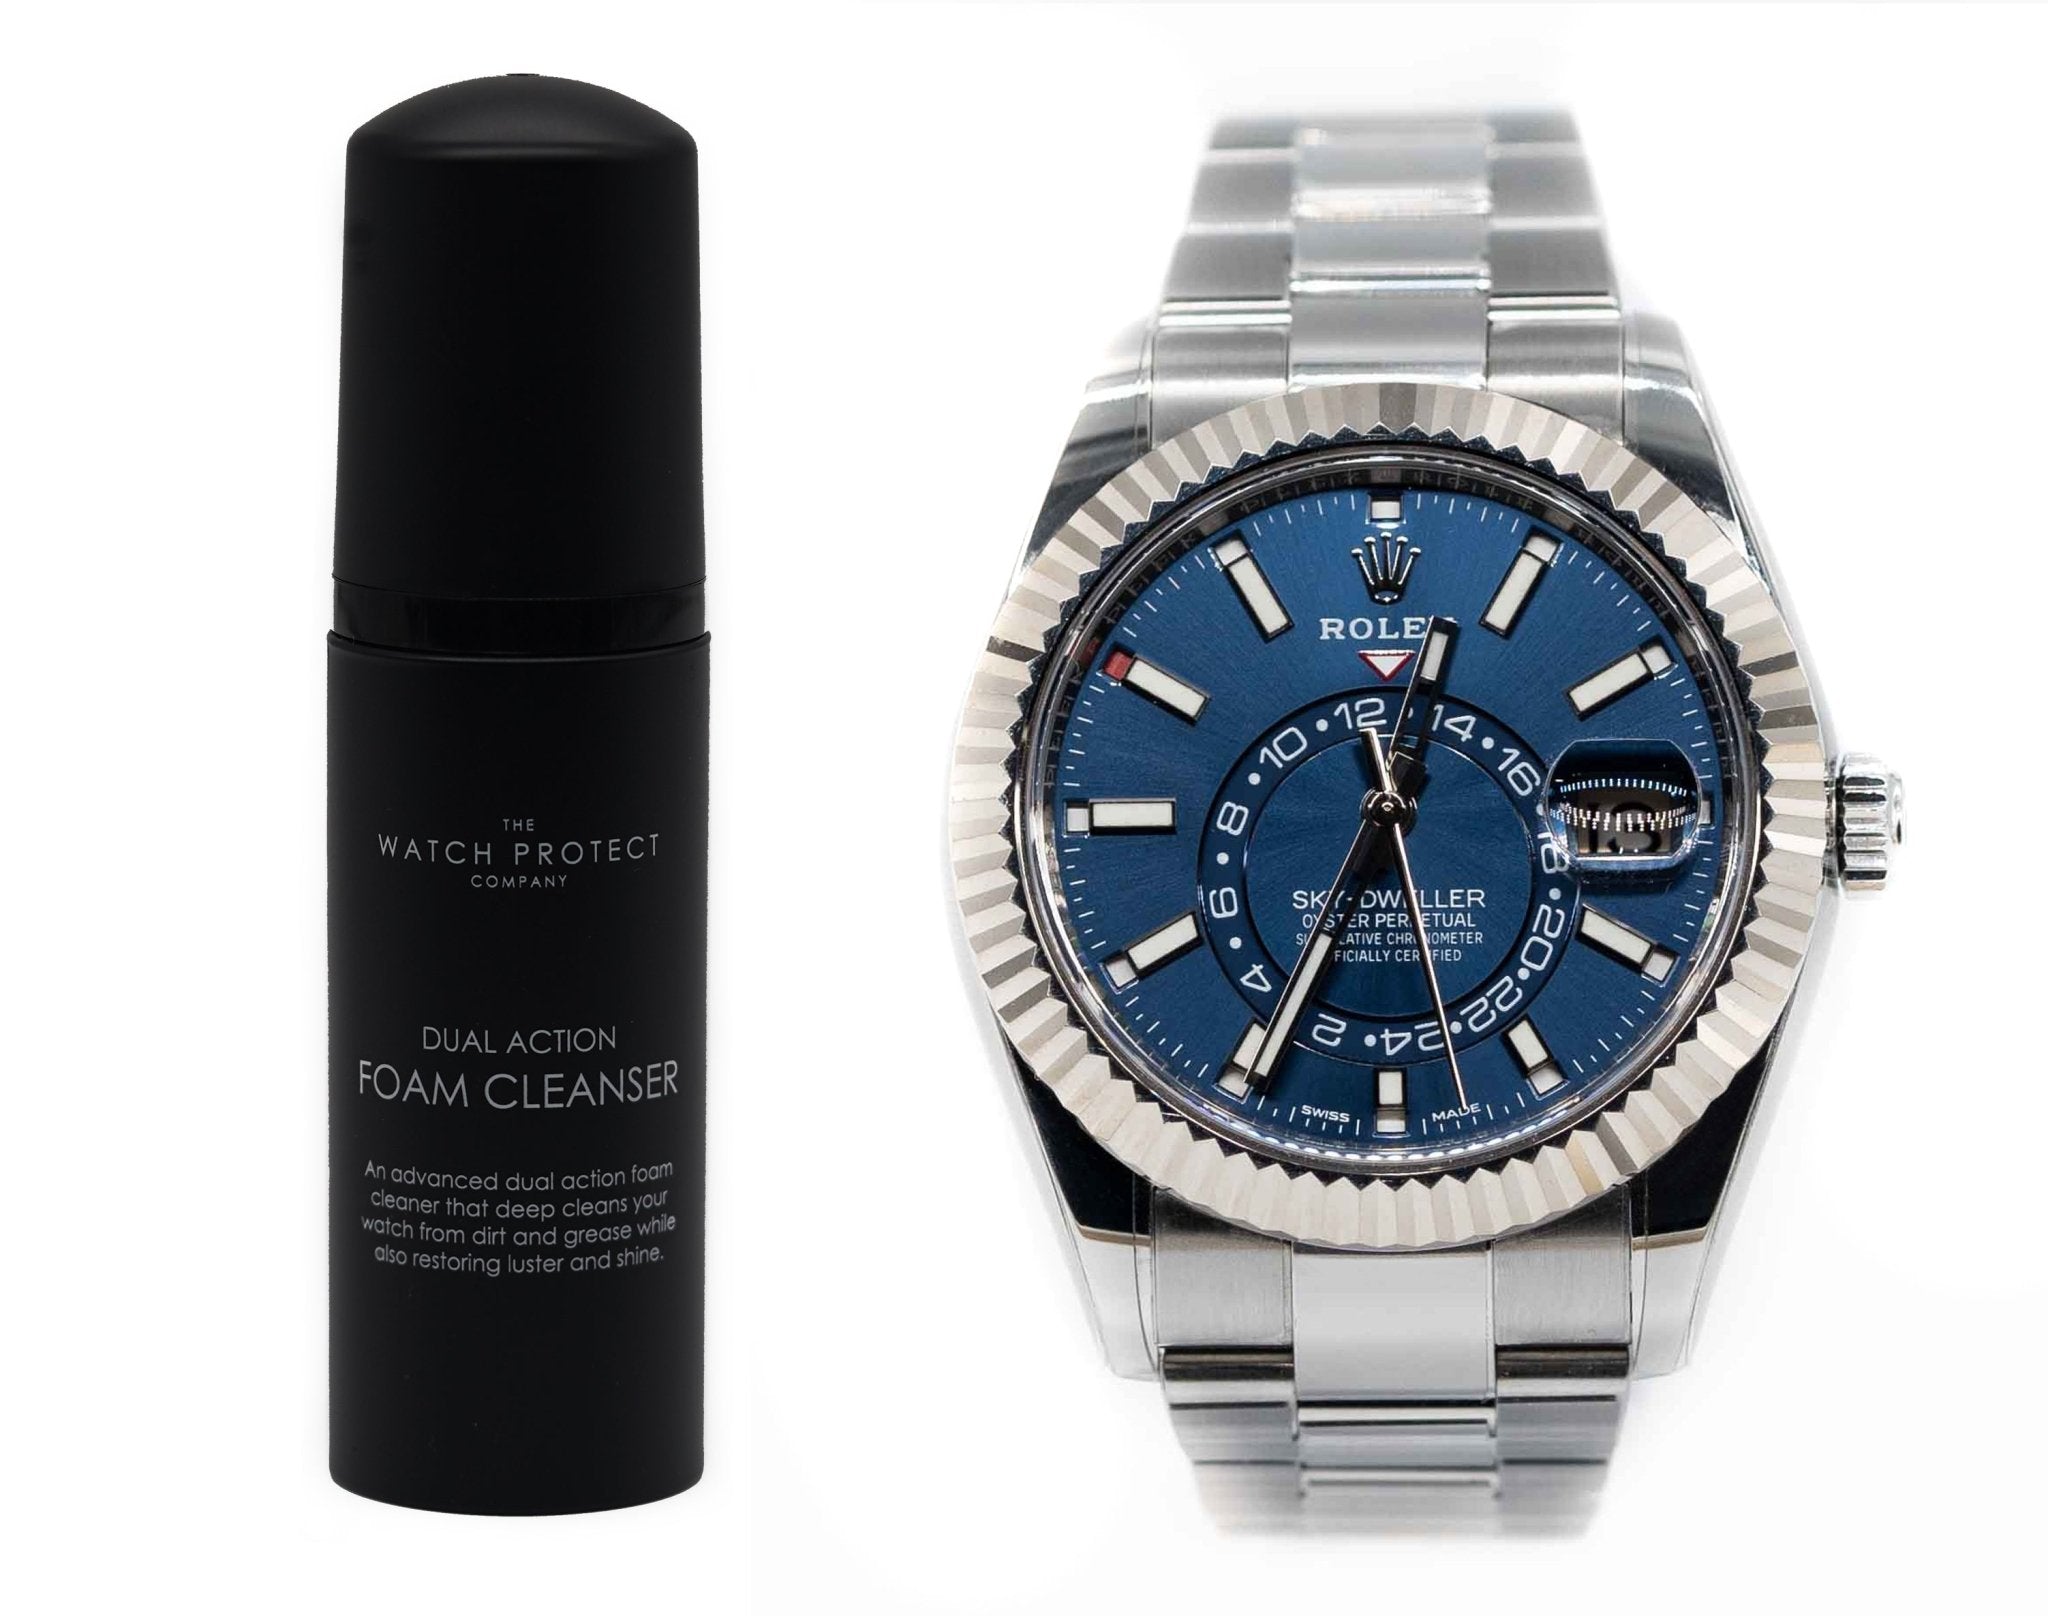 DUAL ACTION FOAM CLEANER & ROLEX SKYDWELLER - TIER 3 - WATCH PROTECTION KIT BUNDLE - The Watch Protect Company